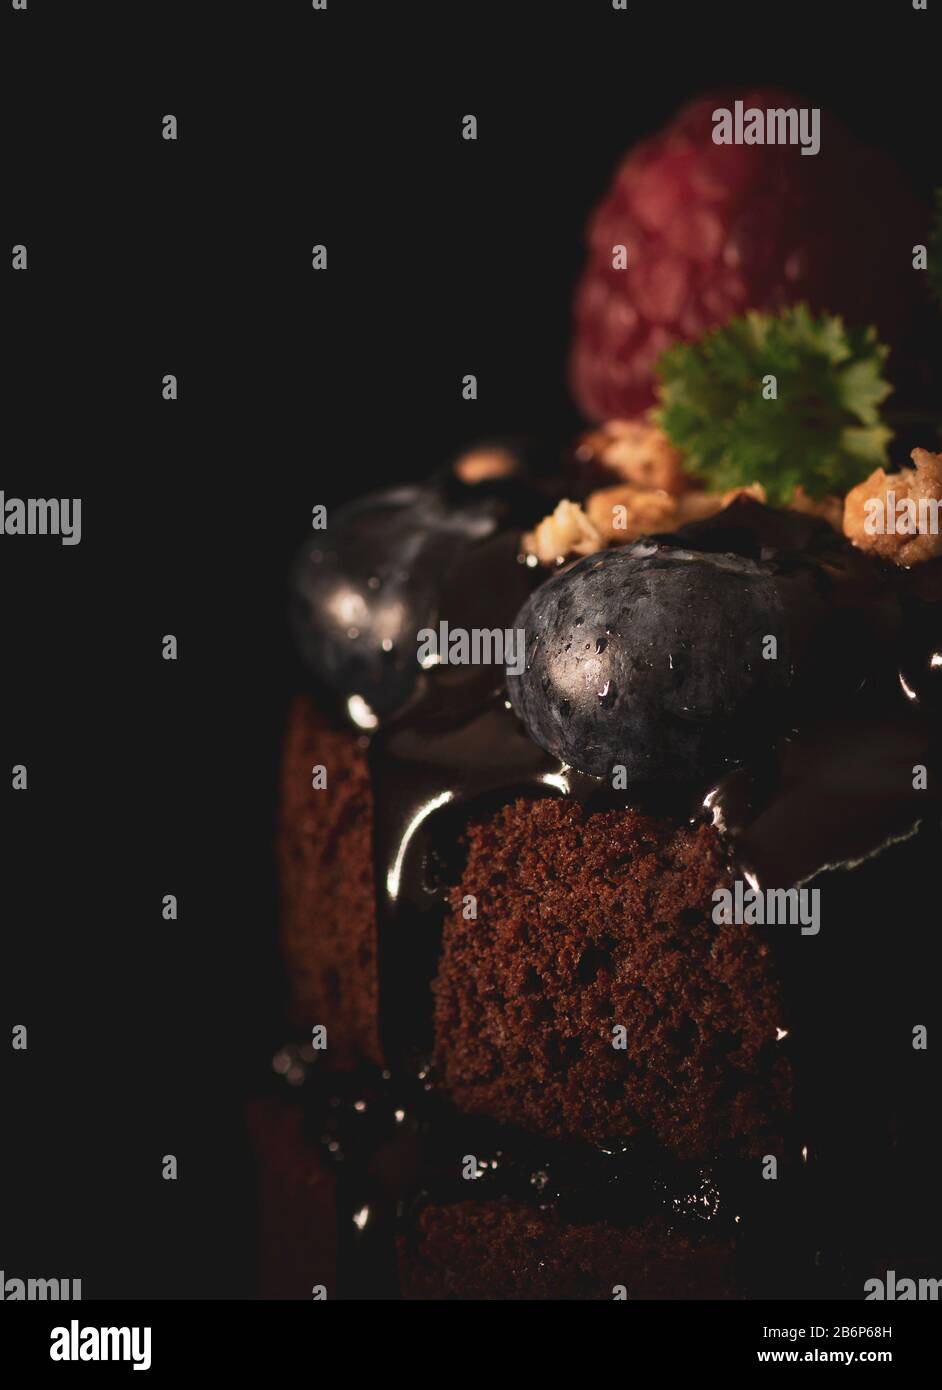 Chocolate muffins with  blueberries on a black background, Moody style, Food photo with dark colors, front view, close up Stock Photo